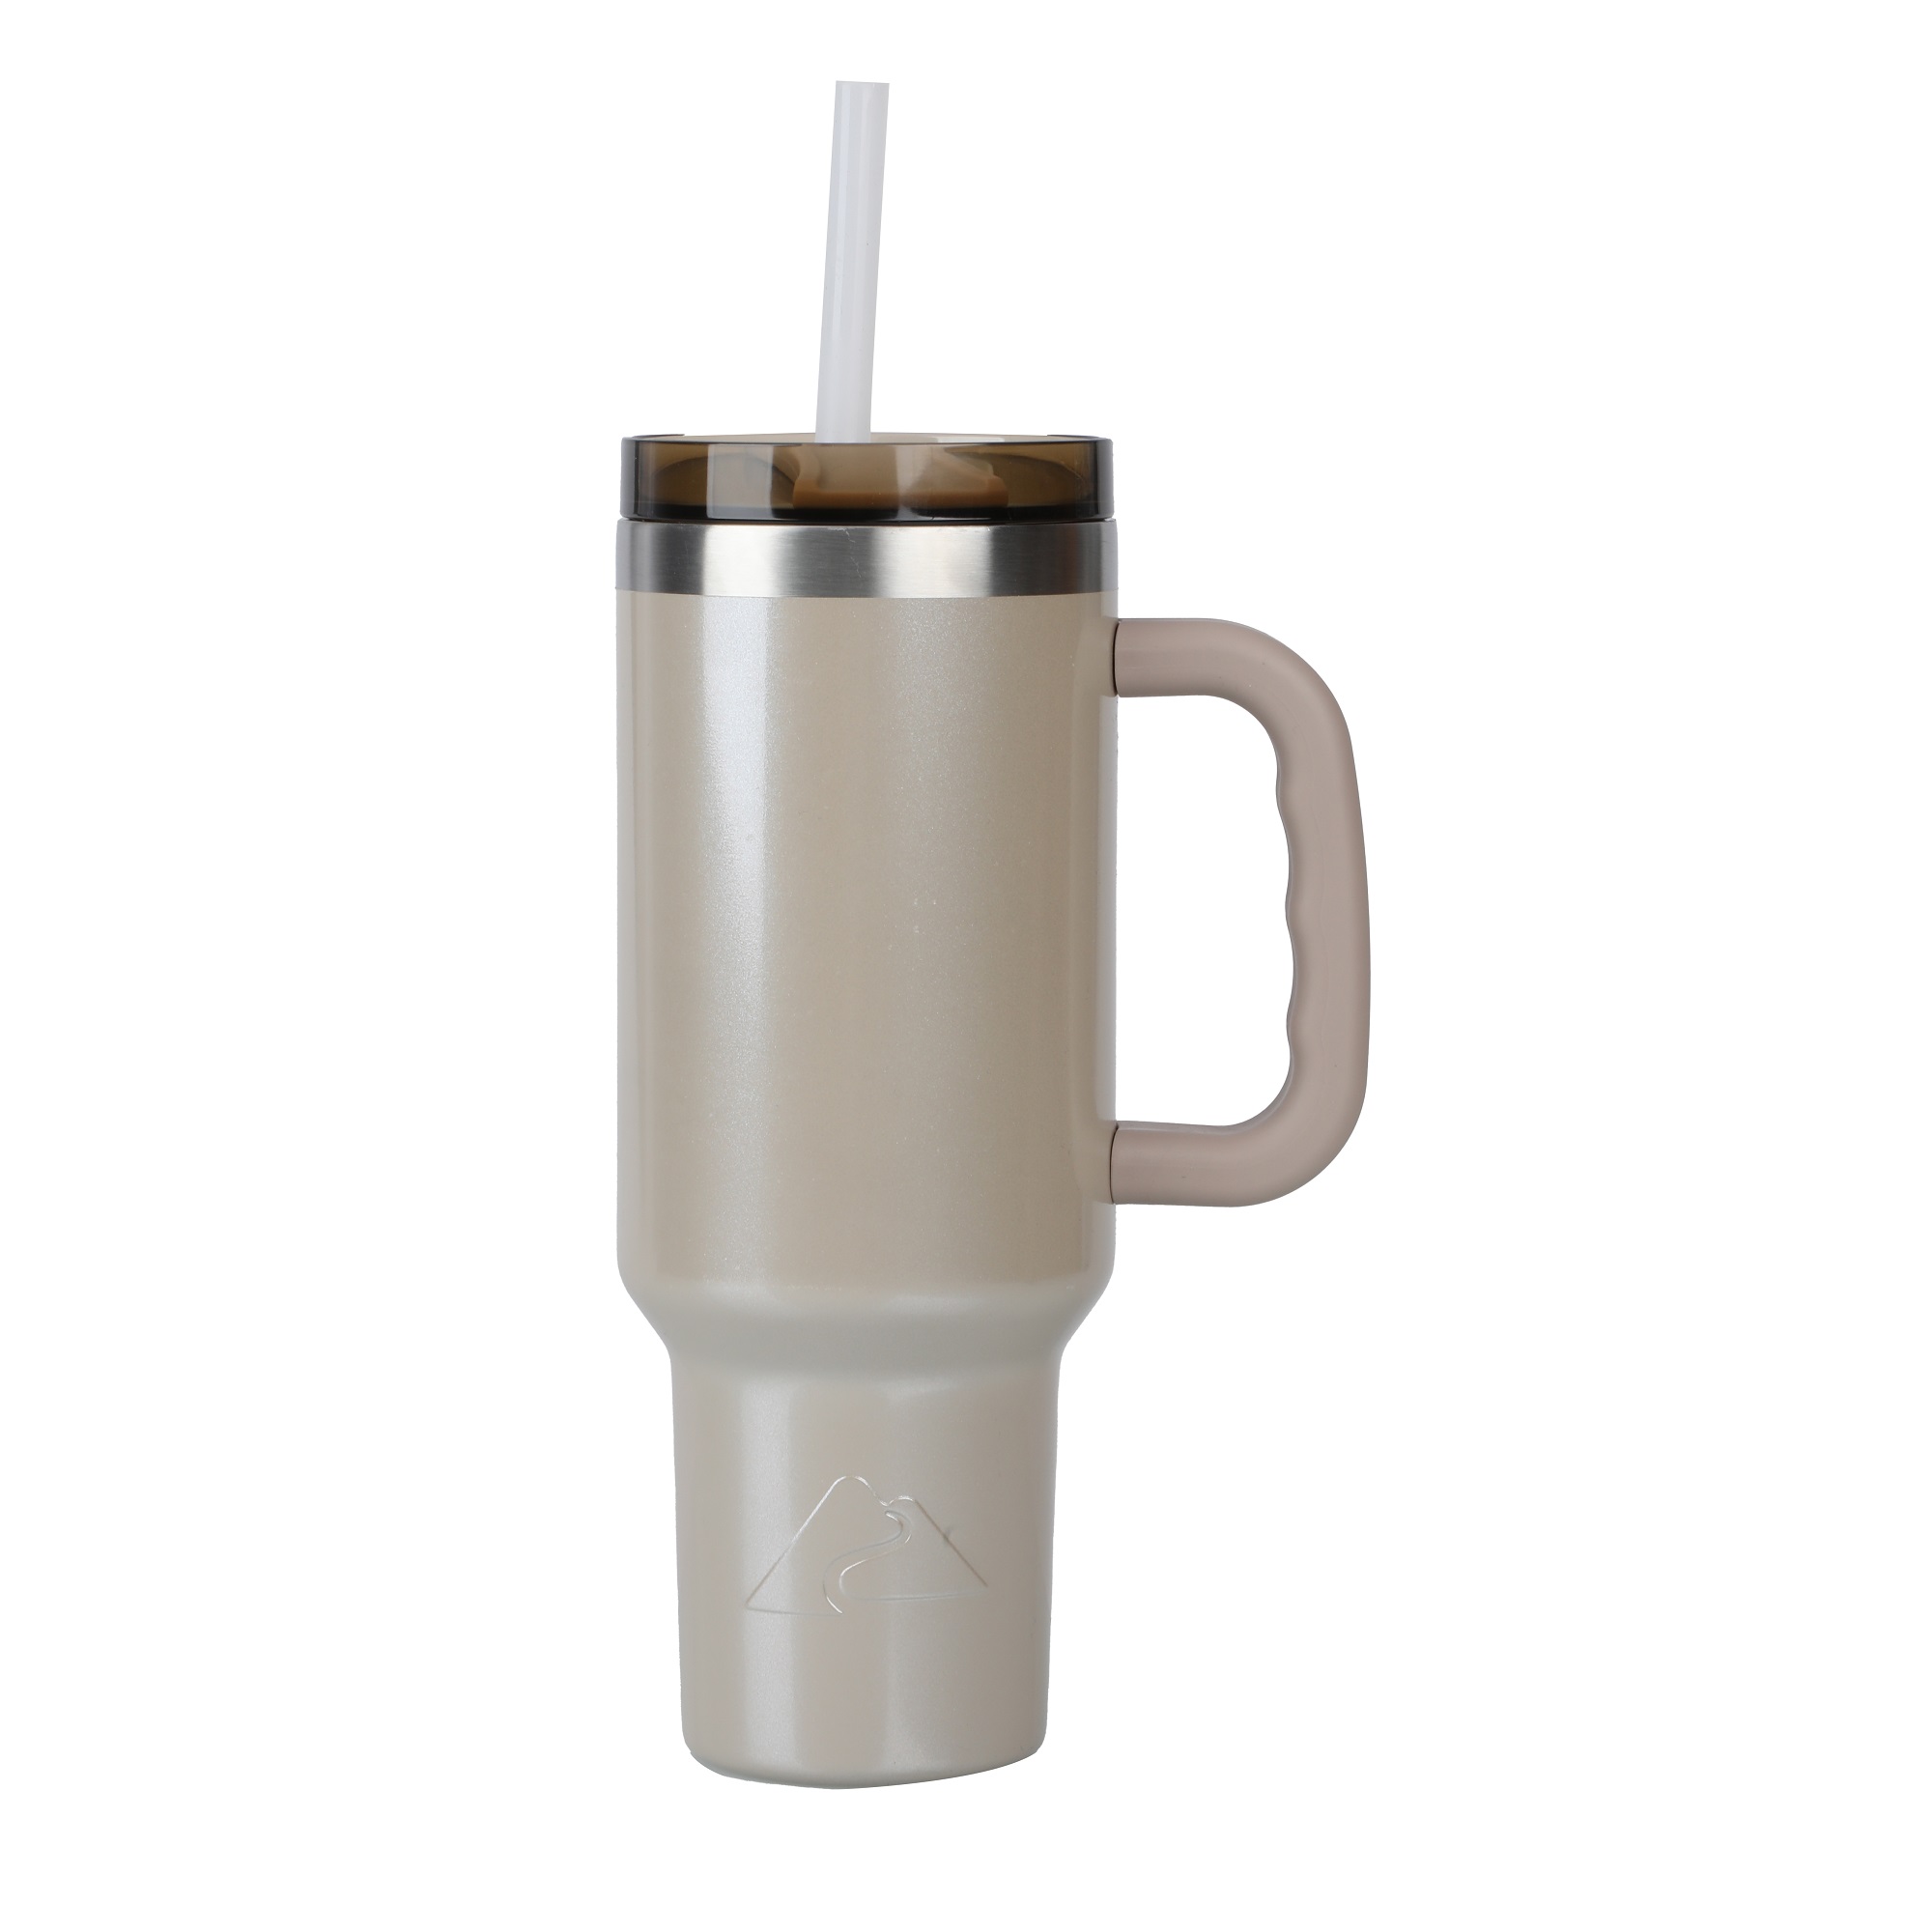 Ozark Trail 40 oz Vacuum Insulated Stainless Steel Tumbler Papyrus Beige - image 1 of 8